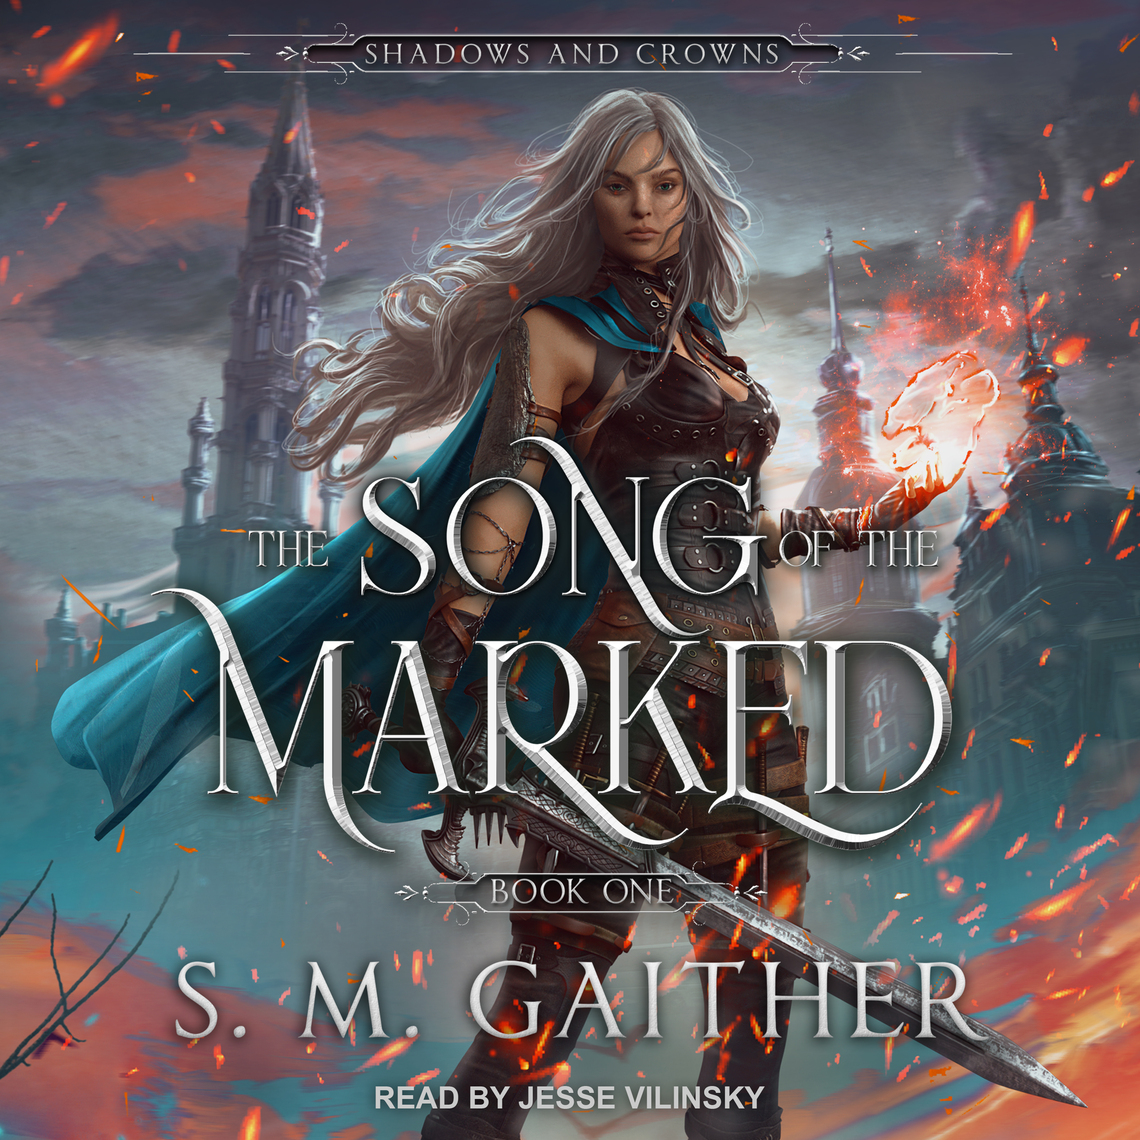 The Song of the Marked (5 book set) by S. M. Gaither, Hardcover